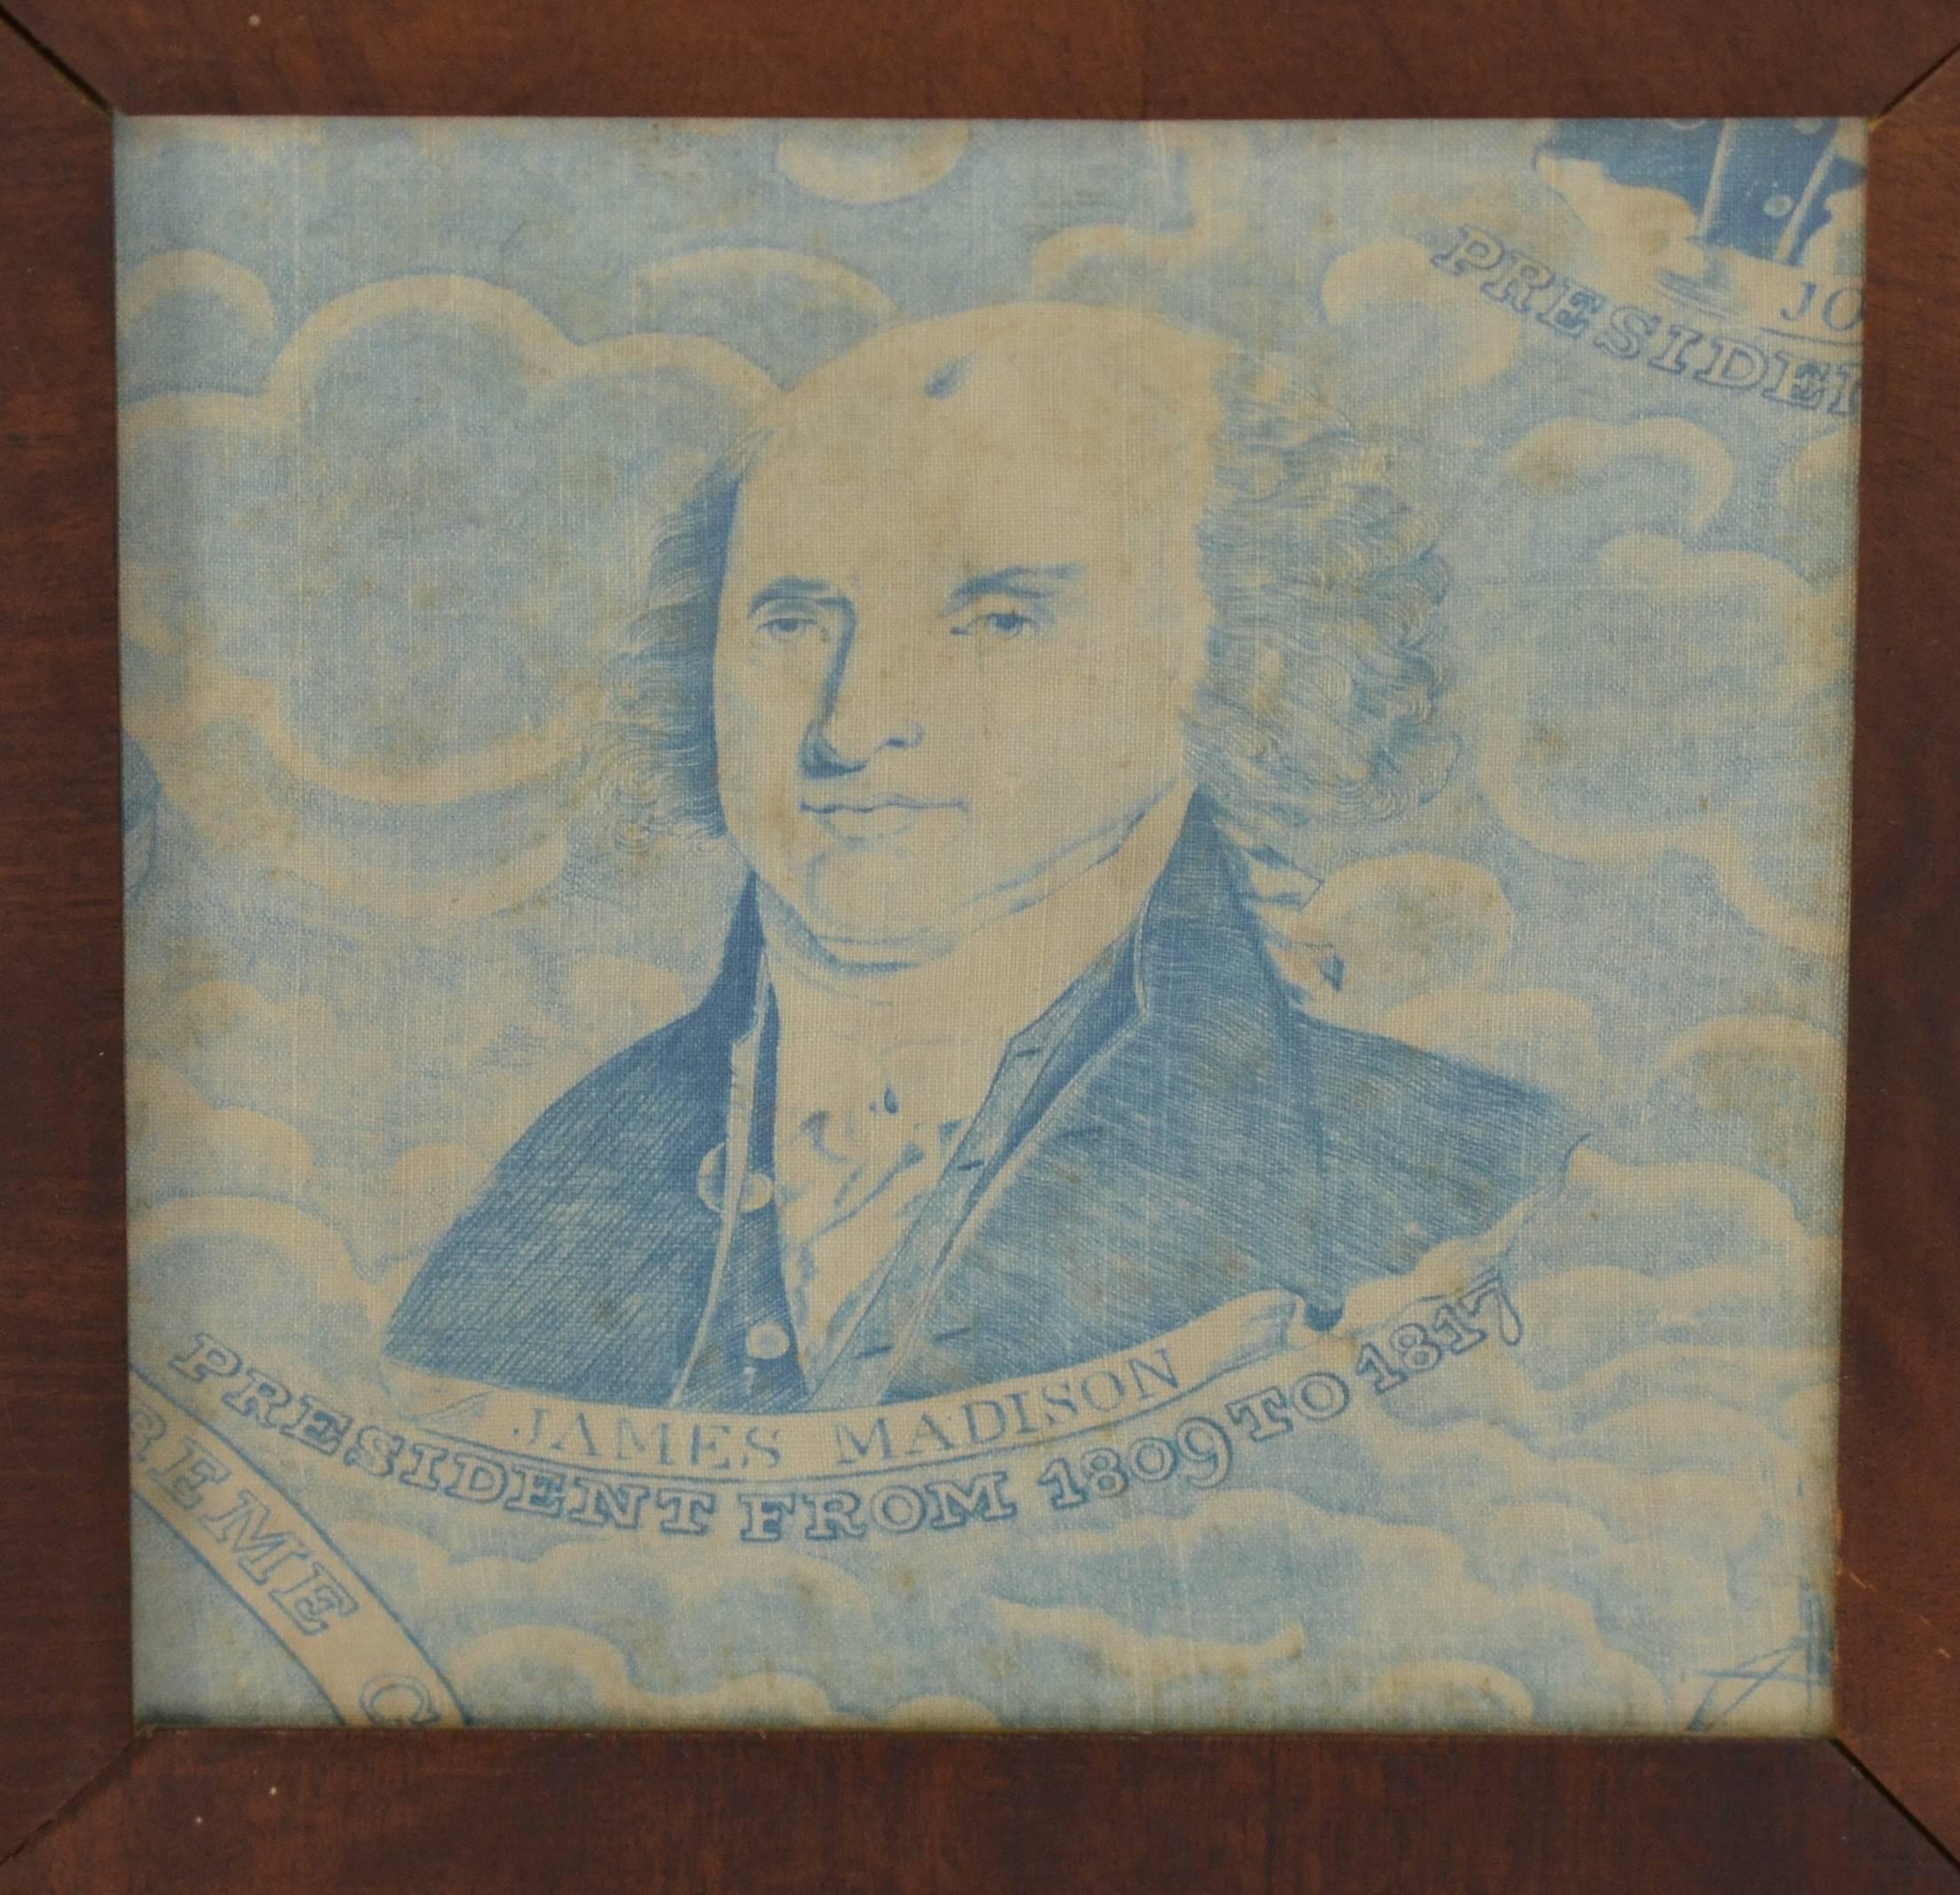 American patriotic toile / copperplate-printed fragment
#407
American patriotic toile / copperplate-printed fragment, bust-portrait, depicting 